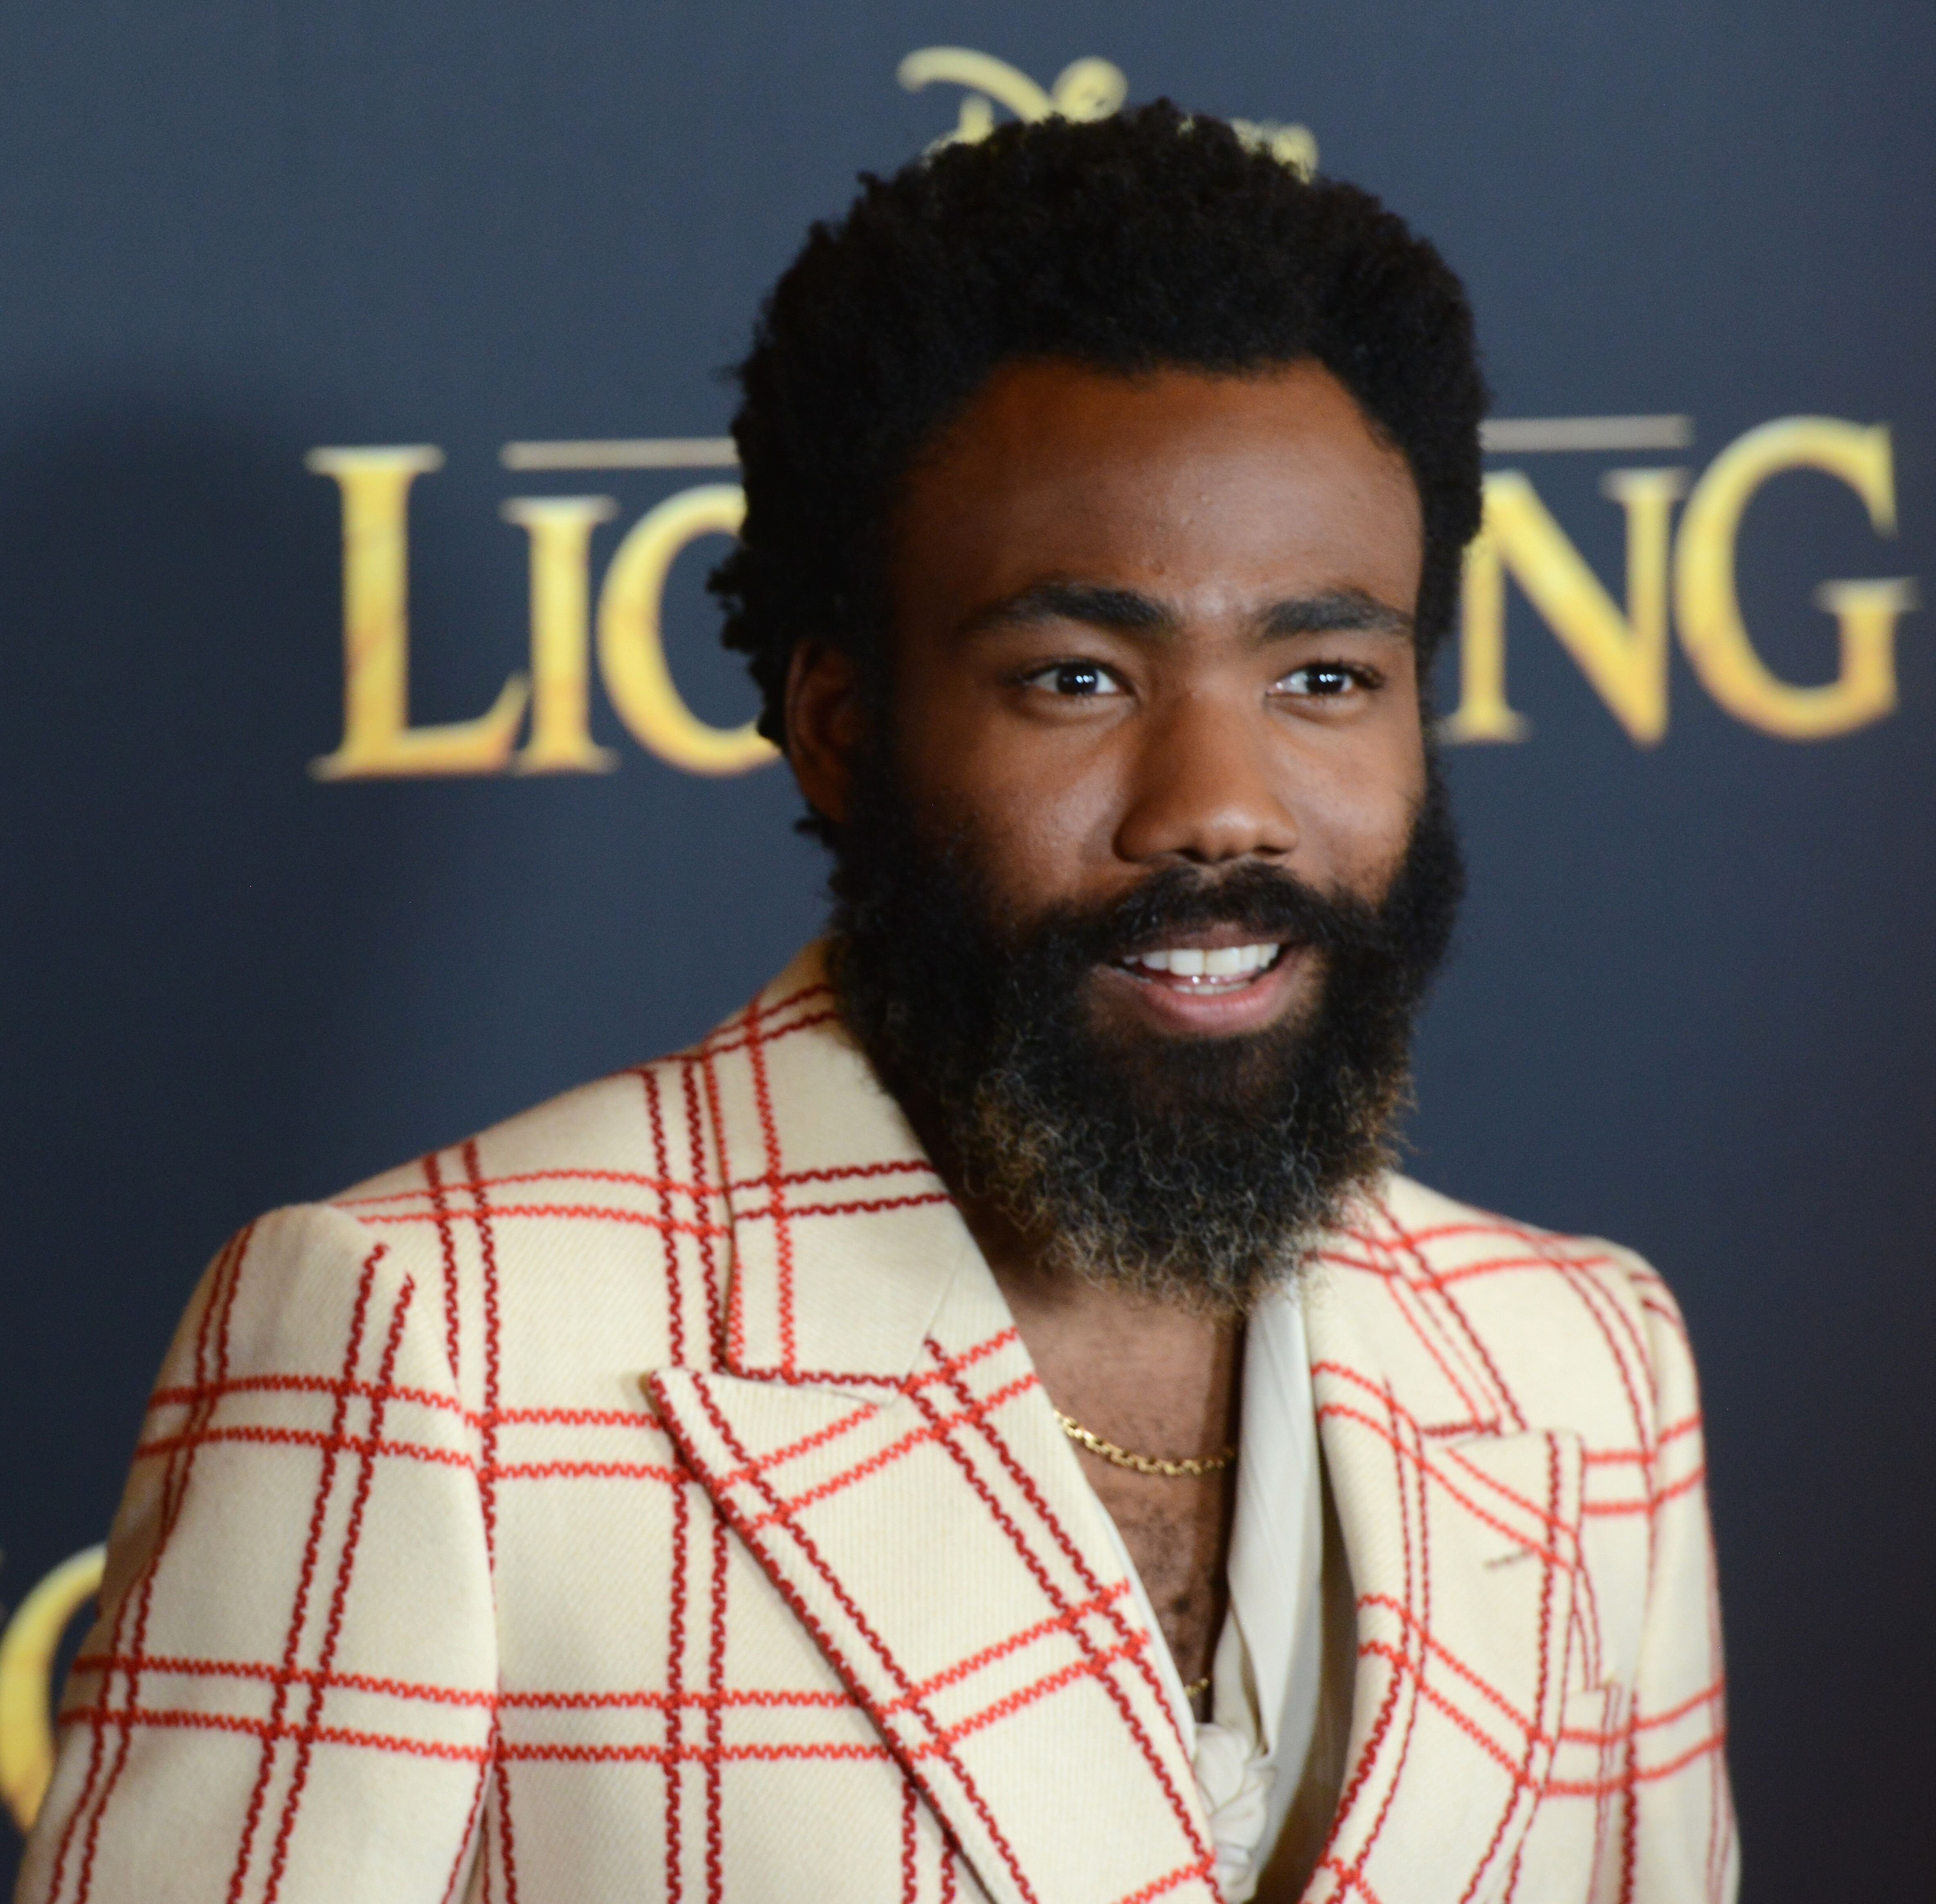 Donald Glover arrives for the Premiere Of Disney's "The Lion King." | Source: Getty Images